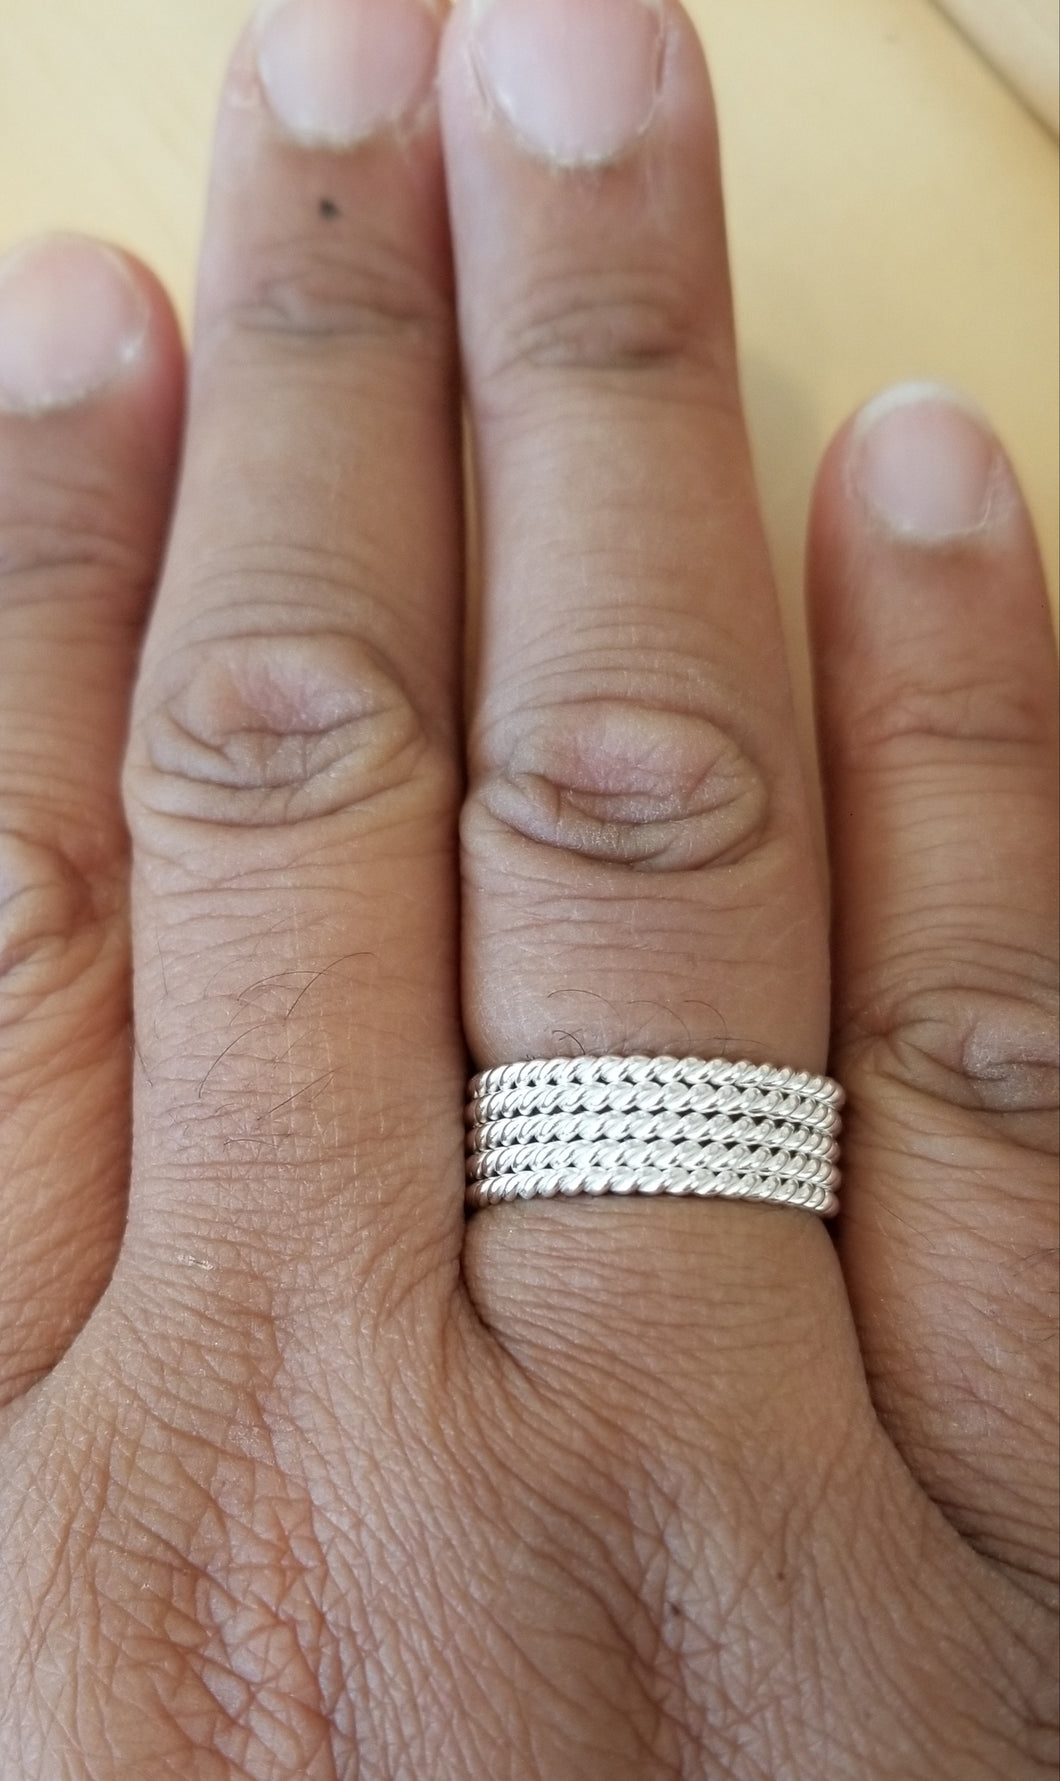 5 lined Rope ring